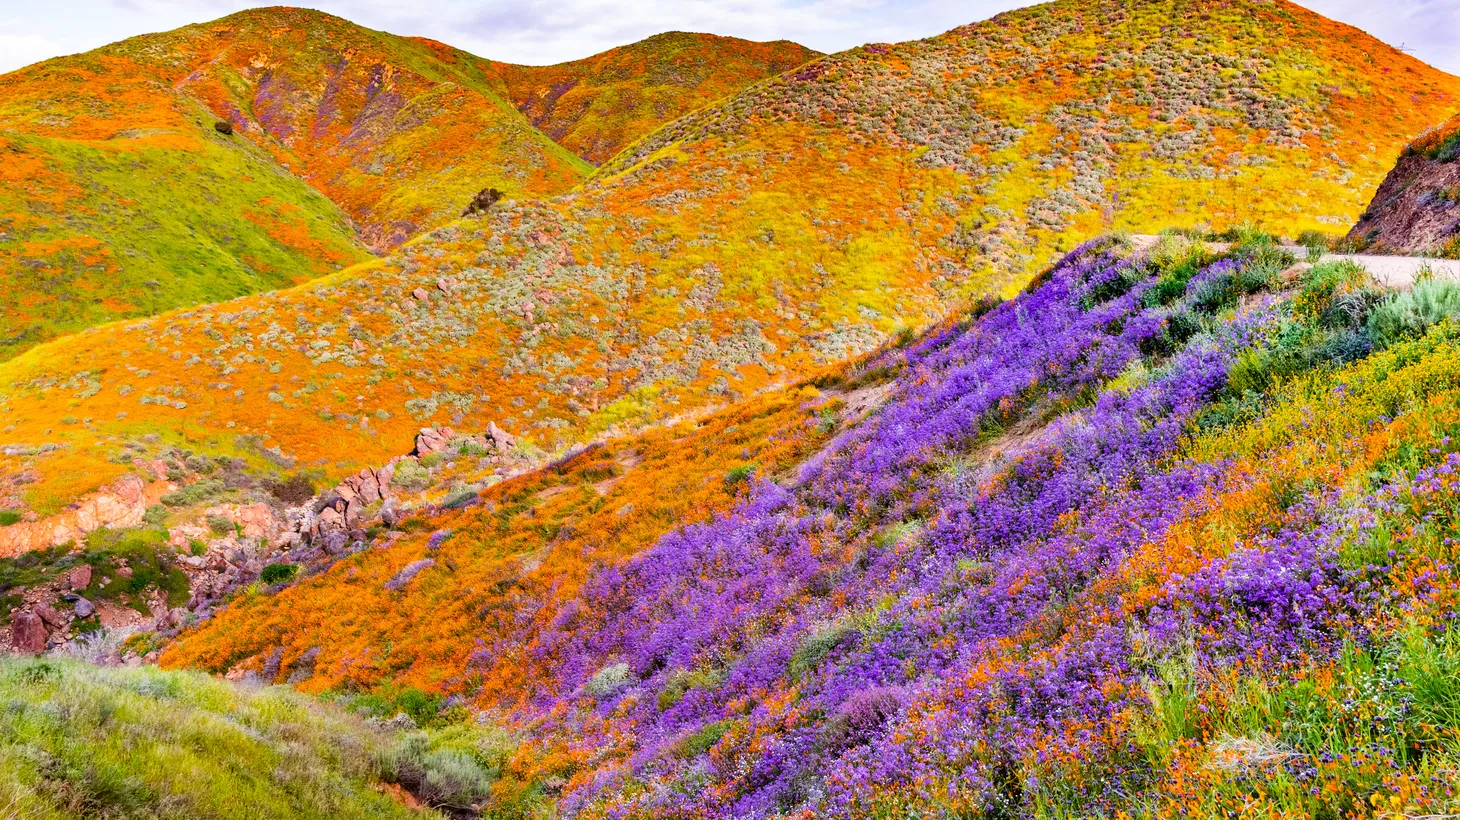 Landscape in Walker Canyon during the superbloom, California poppies covering the mountain valleys and ridges, Lake Elsinore.